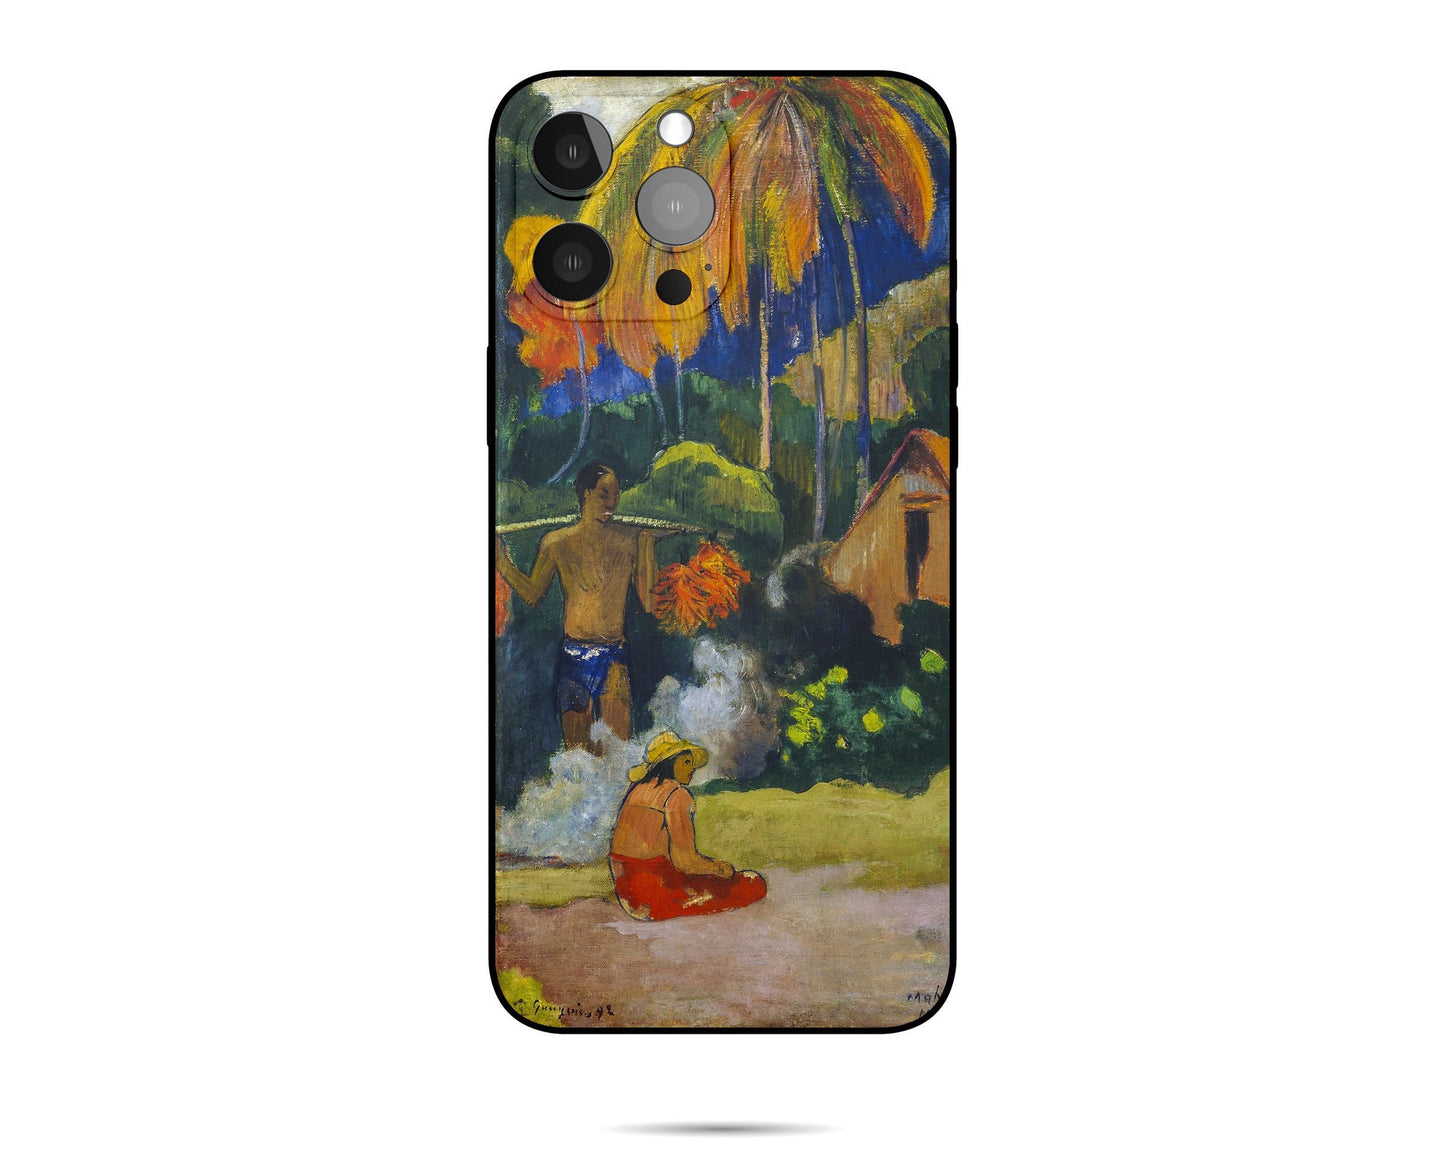 Iphone 14 Case Of Paul Gauguin Famous Painting, Iphone 12 Pro Case, Iphone 7 Plus Case, Designer Iphone 8 Plus Case, Iphone Protective Case